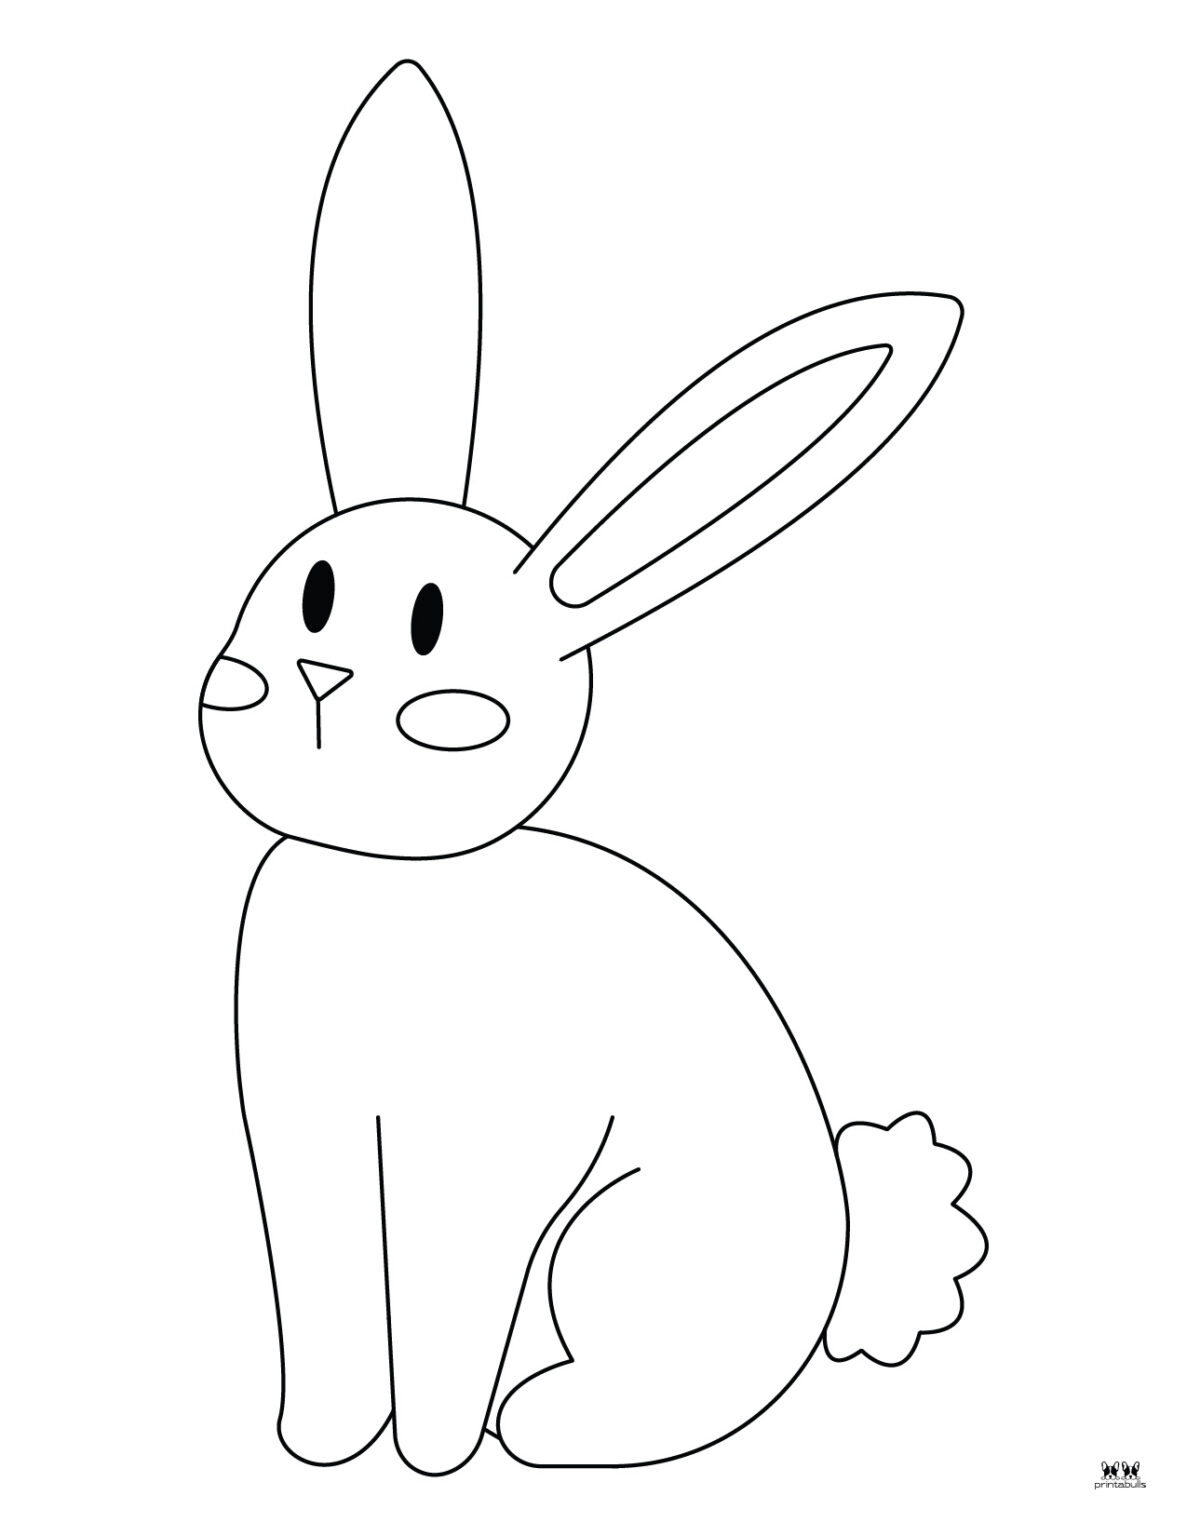 Bunny Coloring Pages - 28 FREE Pages | Printabulls